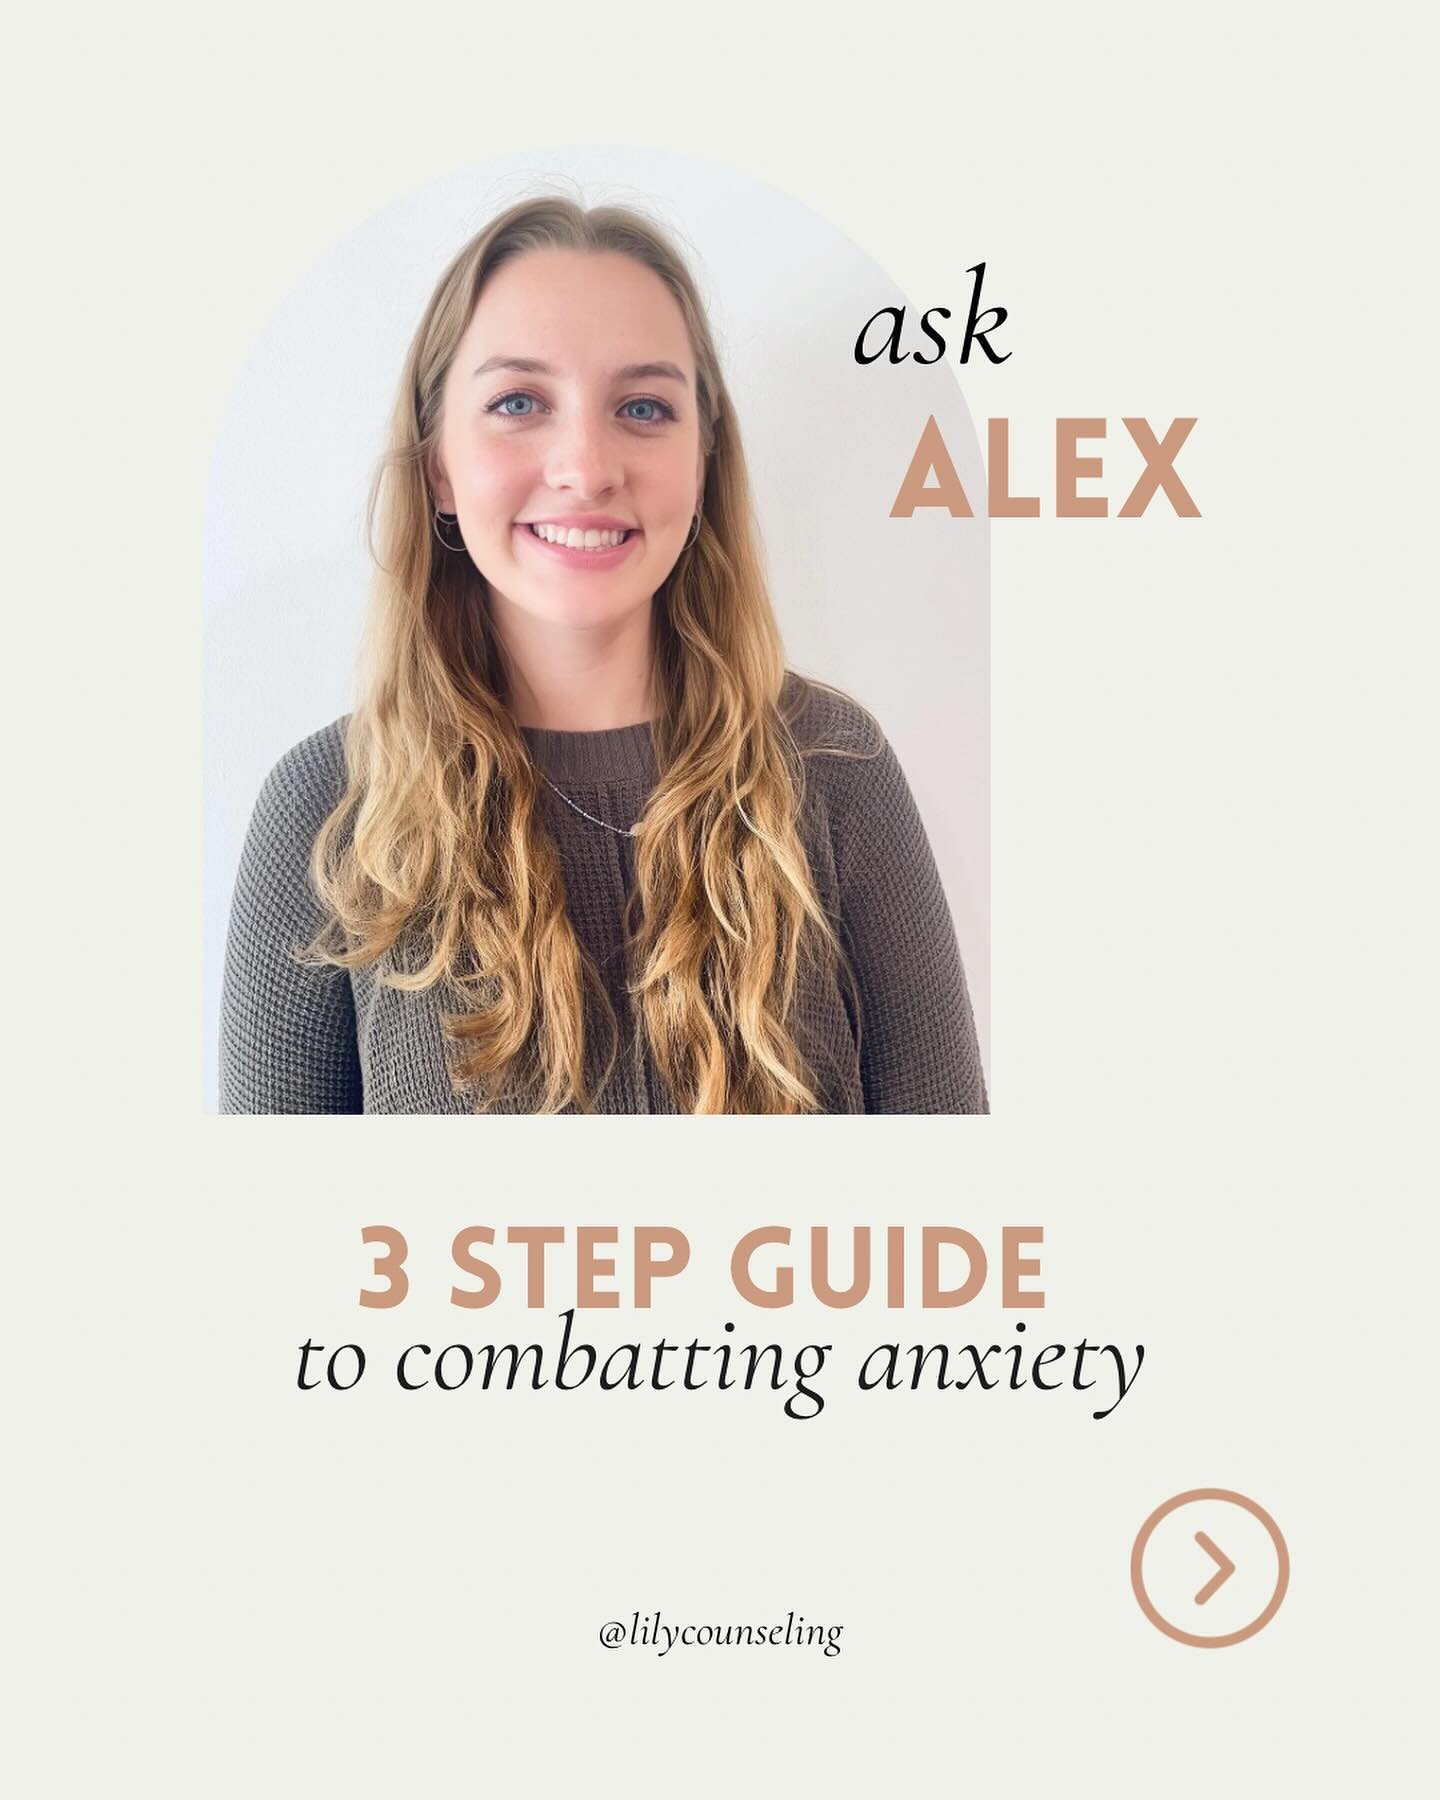 Check out Alex&rsquo;s 3-step guide to combatting anxiety!

.
#lilycounseling #combattinganxiety #mentalhealthtips #anxietyrelief #chicagotherapy #chicagotherapists #therapyforwomen #coachingforwomen #chicagocoaching #highperformancecoaching #healthc